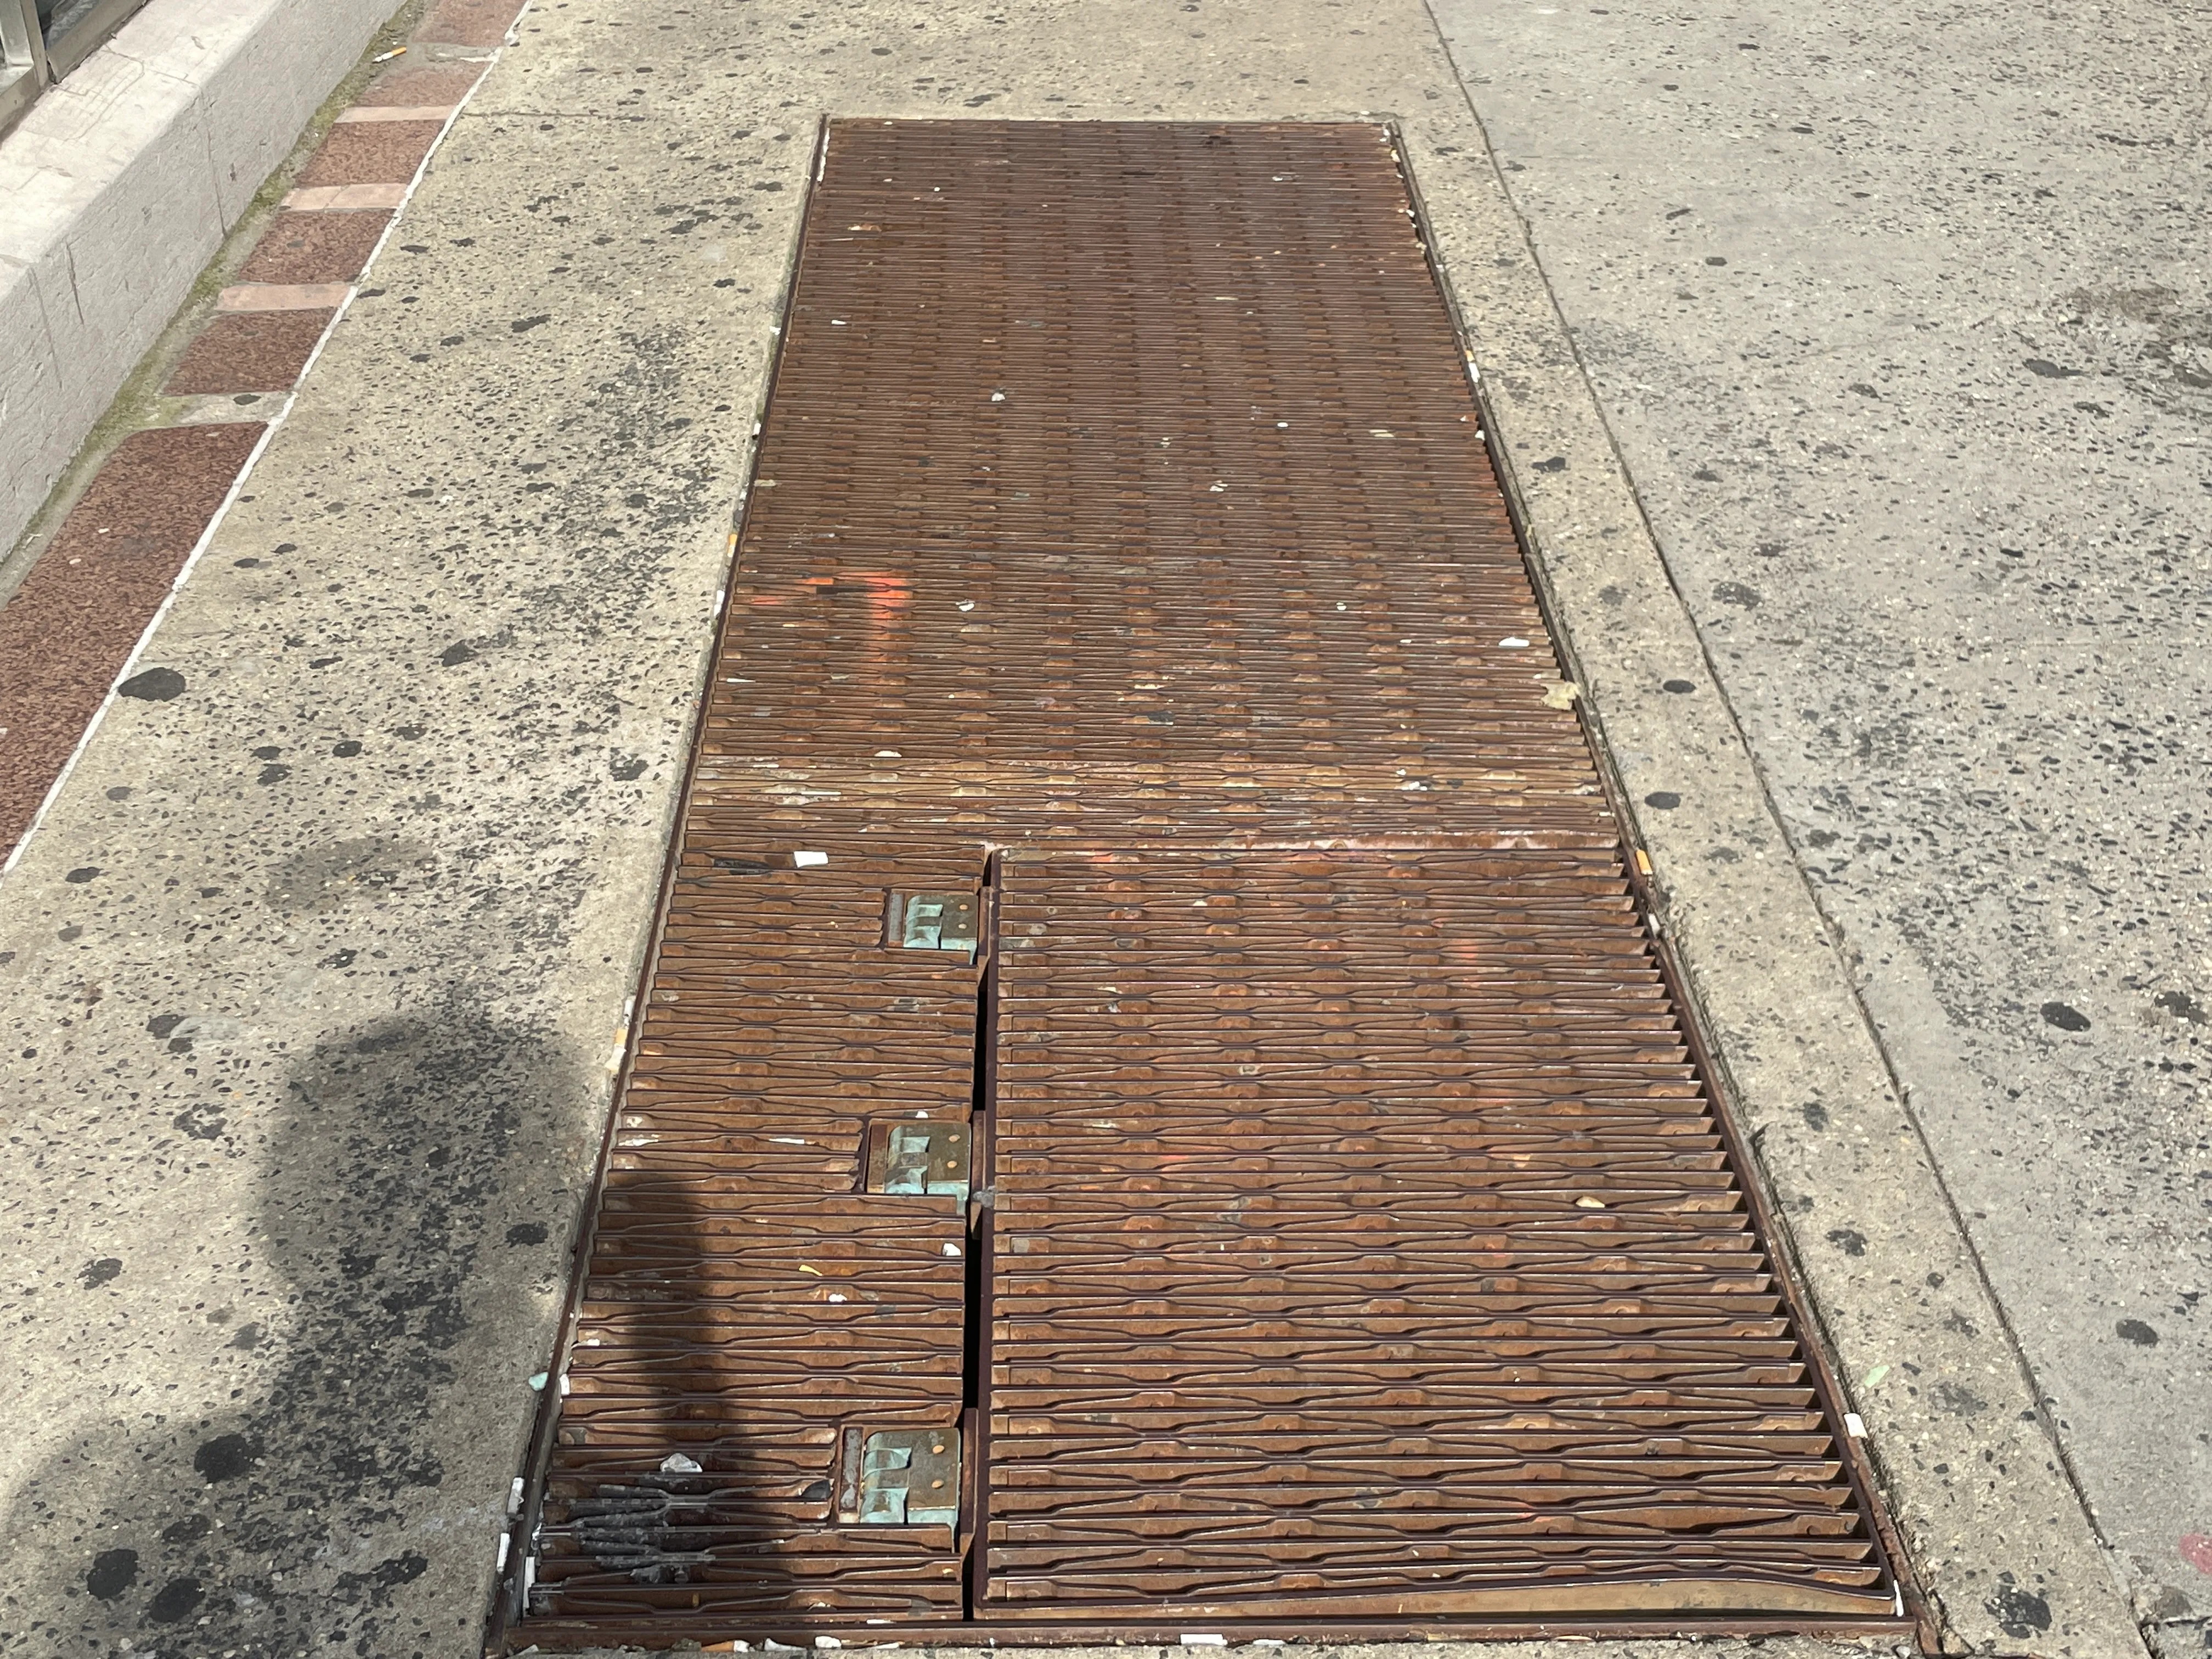 A photograph of a sidewalk grate somewhere in downtown Brooklyn.